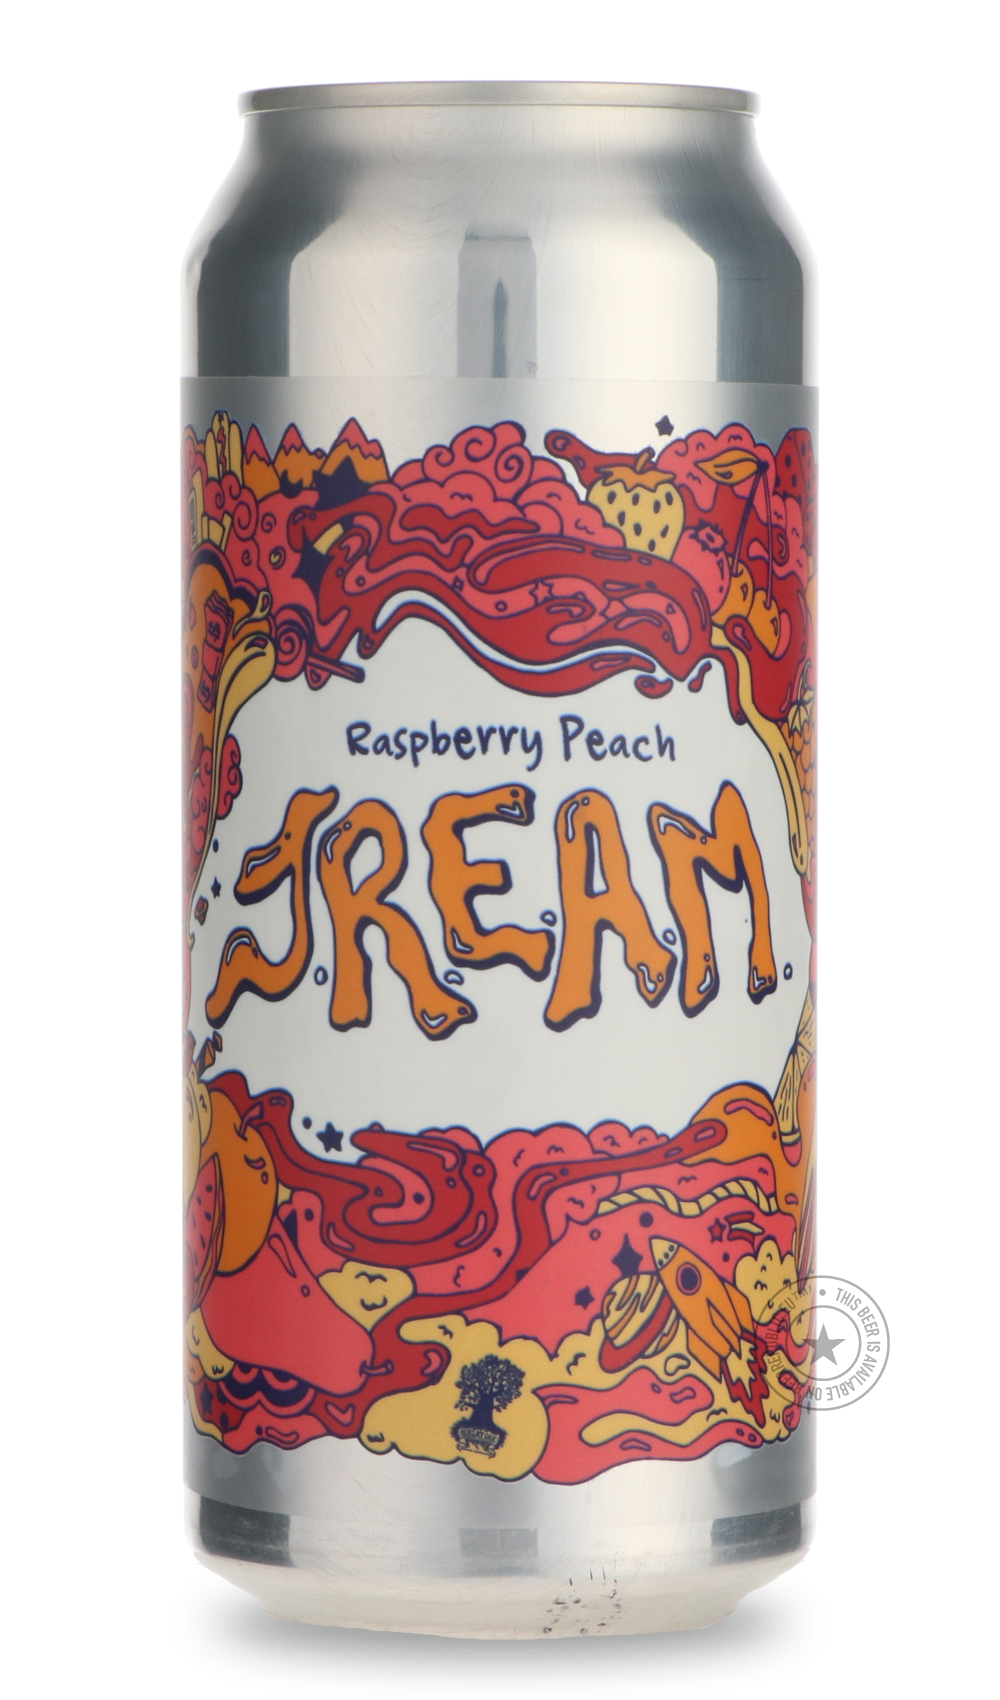 -Burley Oak- Raspberry Peach J.R.E.A.M.-Sour / Wild & Fruity- Only @ Beer Republic - The best online beer store for American & Canadian craft beer - Buy beer online from the USA and Canada - Bier online kopen - Amerikaans bier kopen - Craft beer store - Craft beer kopen - Amerikanisch bier kaufen - Bier online kaufen - Acheter biere online - IPA - Stout - Porter - New England IPA - Hazy IPA - Imperial Stout - Barrel Aged - Barrel Aged Imperial Stout - Brown - Dark beer - Blond - Blonde - Pilsner - Lager - W